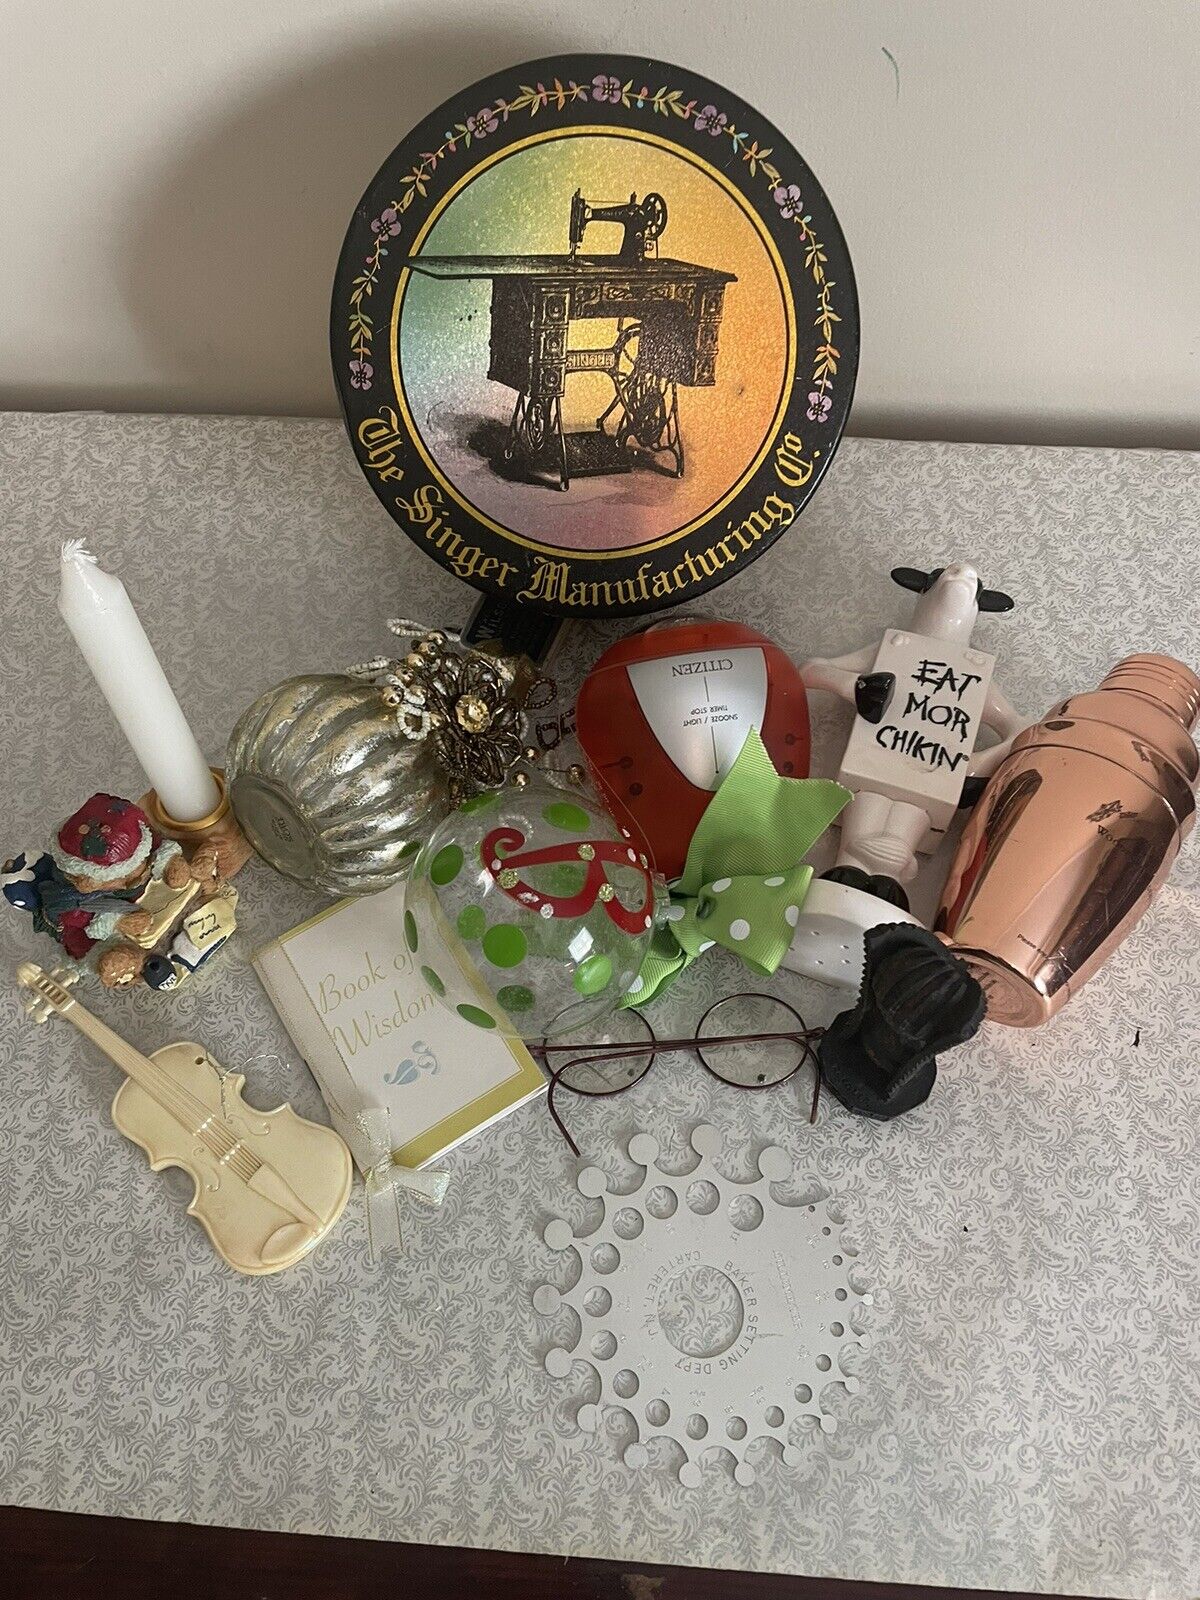 Miscellaneous Junk Drawer items - Some May be Vintage